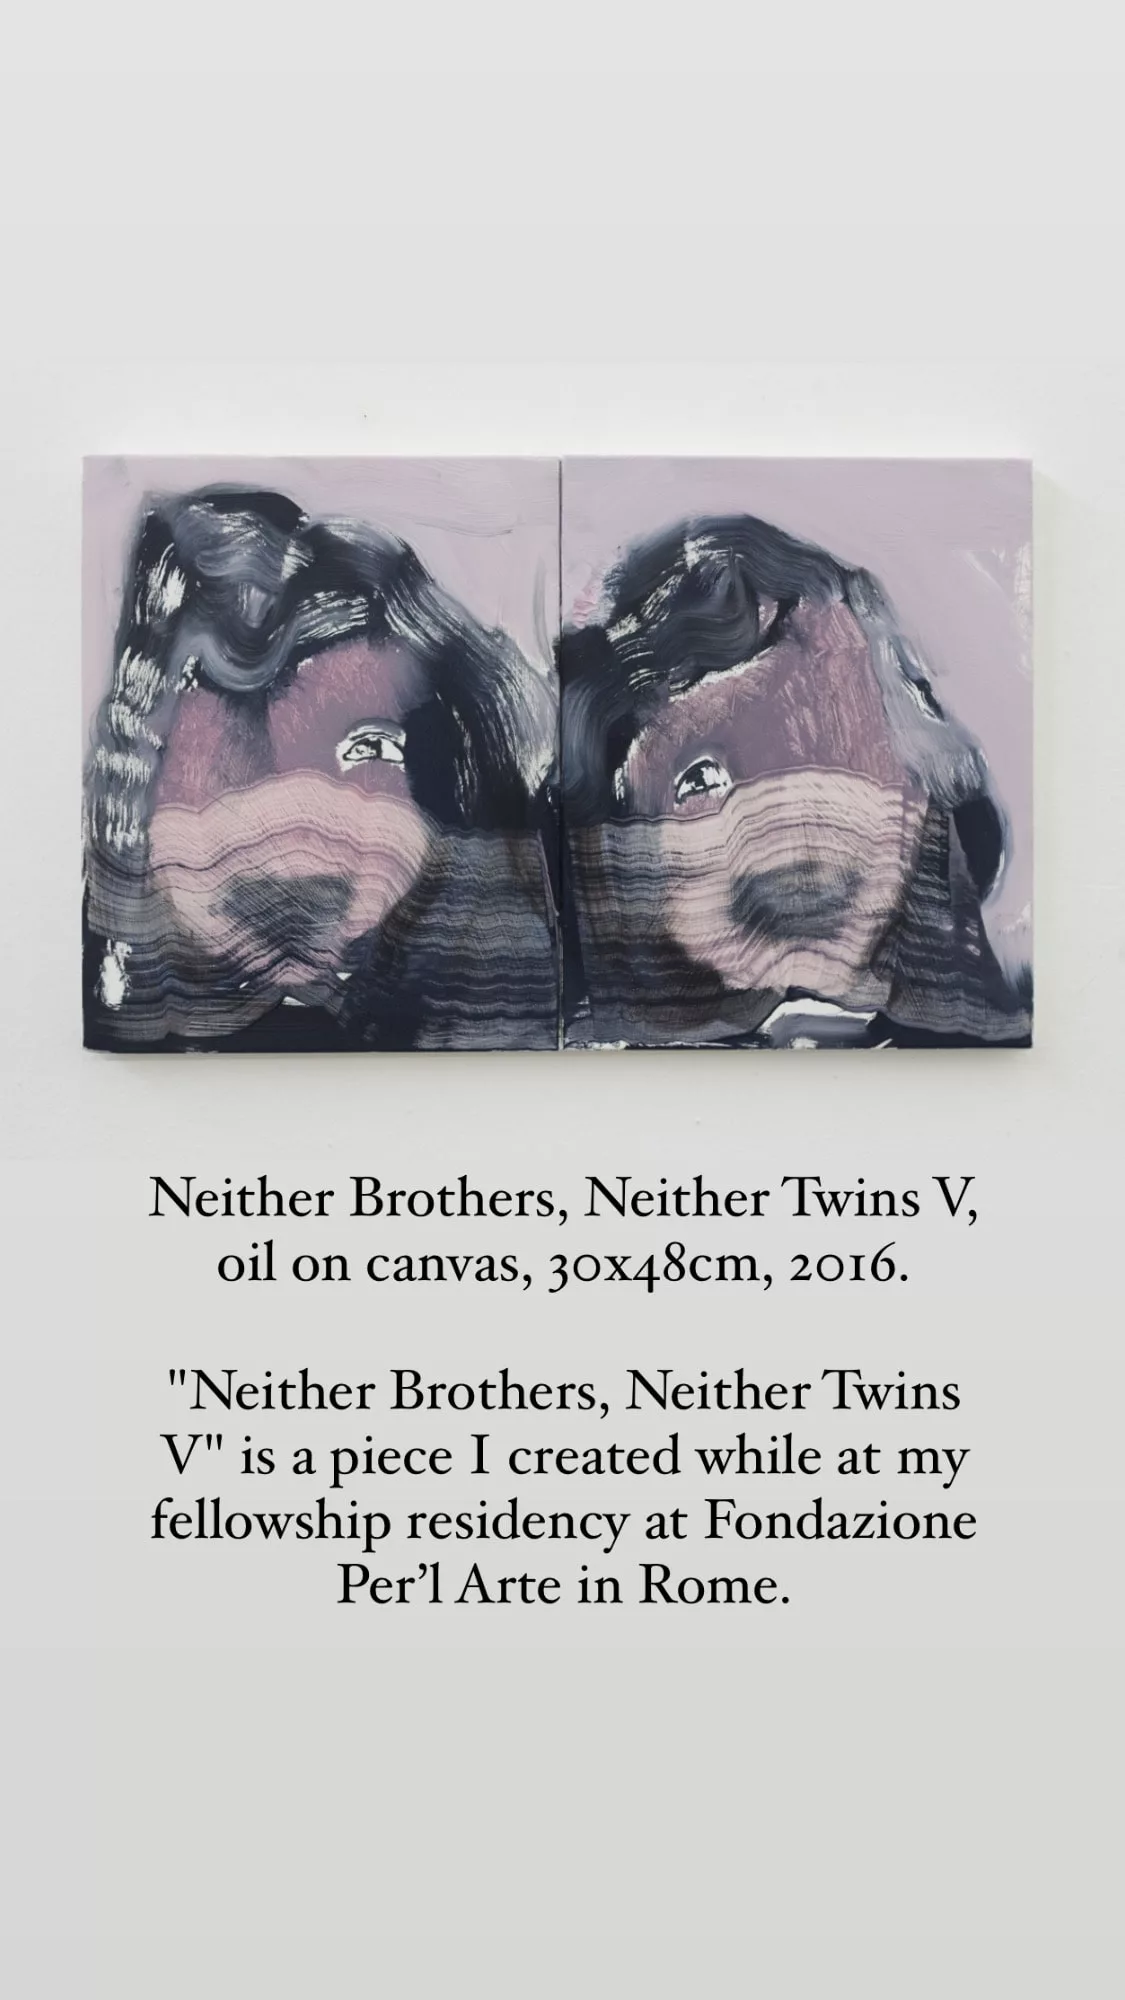 Exploring Human Nature in Neither Brothers, Neither Twins V - A Painting by Bartosz Beda 1